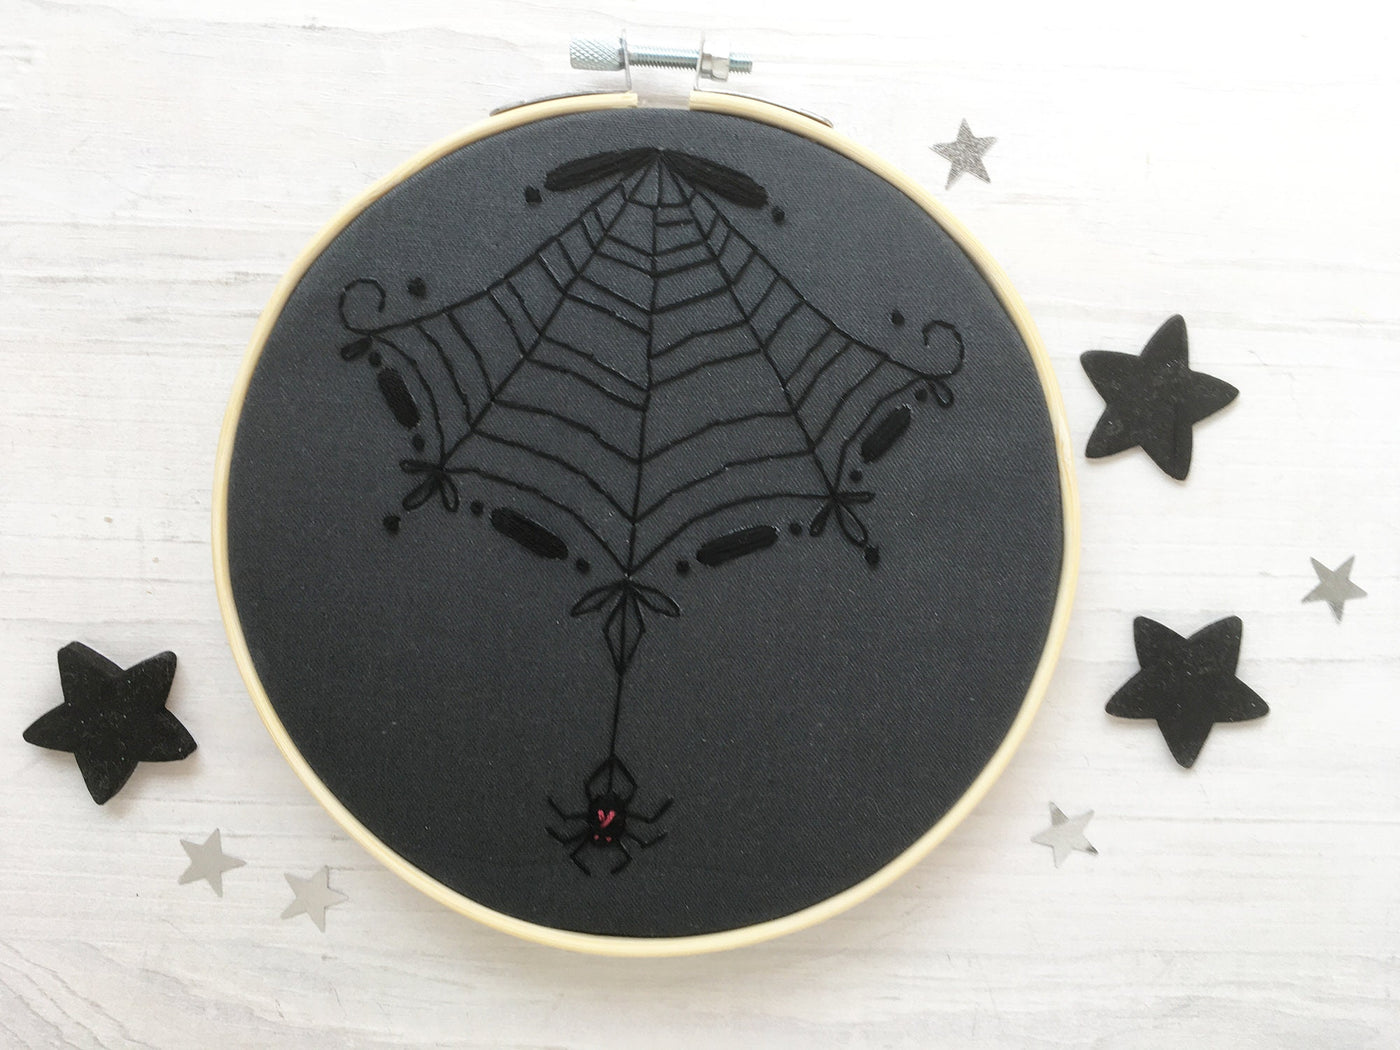 Black Spider Web Hand Embroidery pattern download